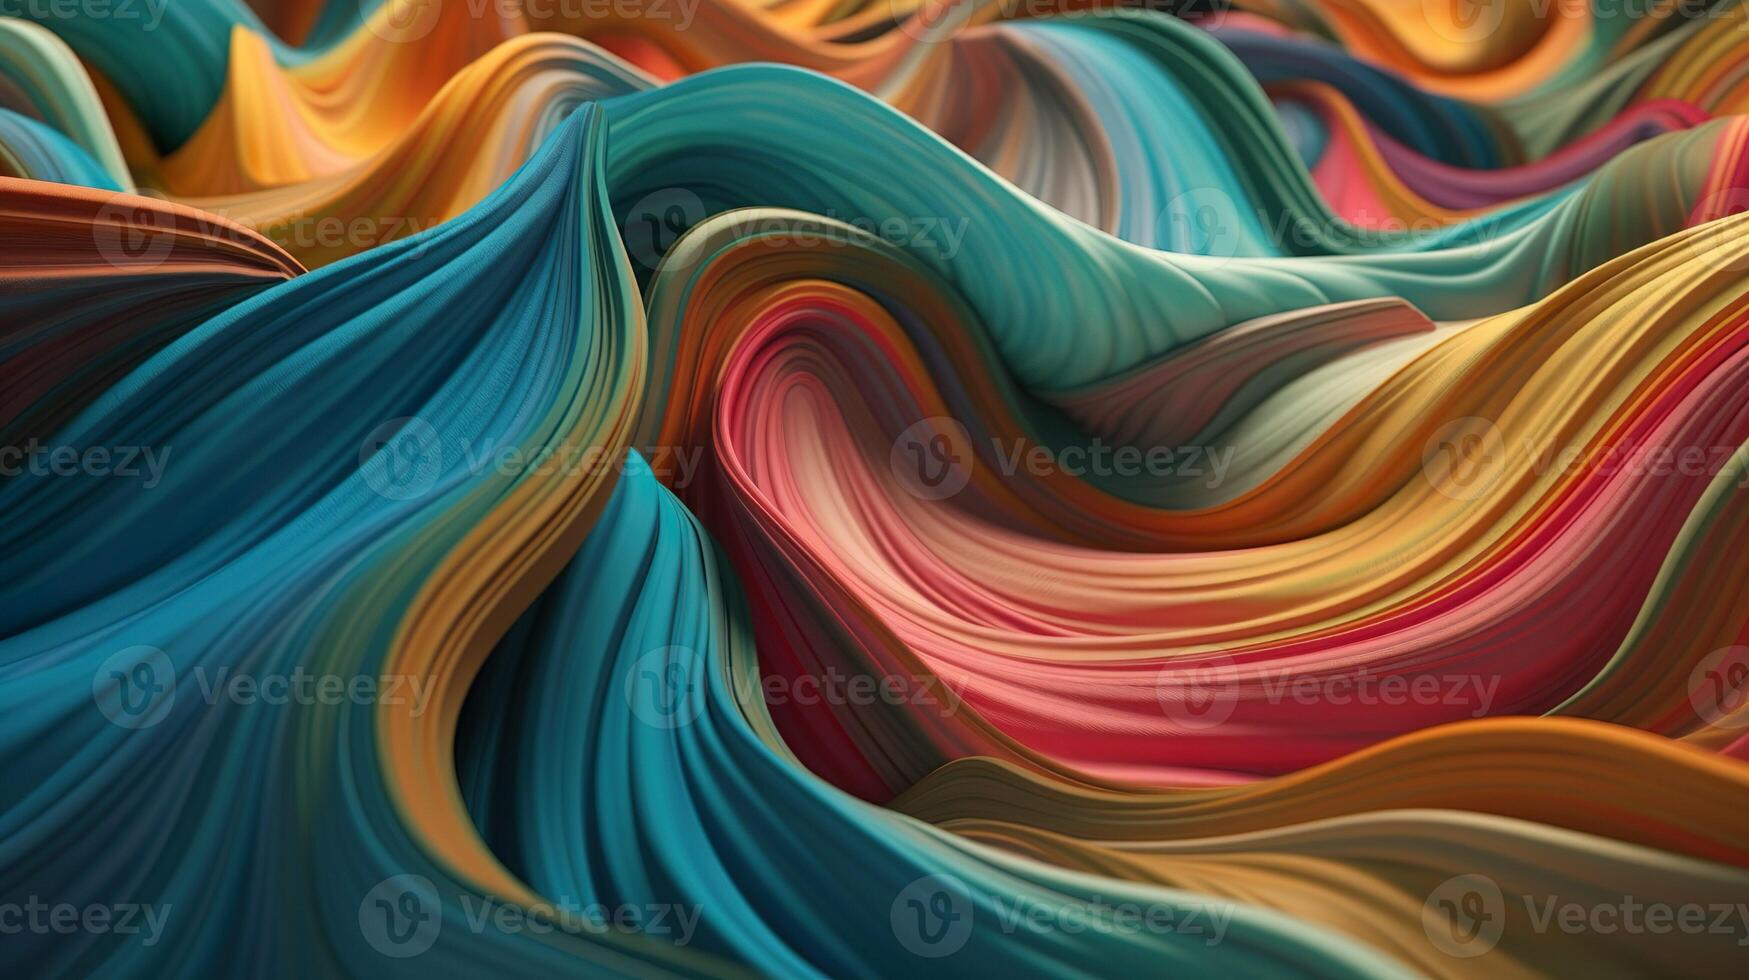 Abstract background with colorful smooth surface waves of cream texture or satin textile with flowing folds. Curve material modern wallpaper. Horizontal illustration for banner design. . photo